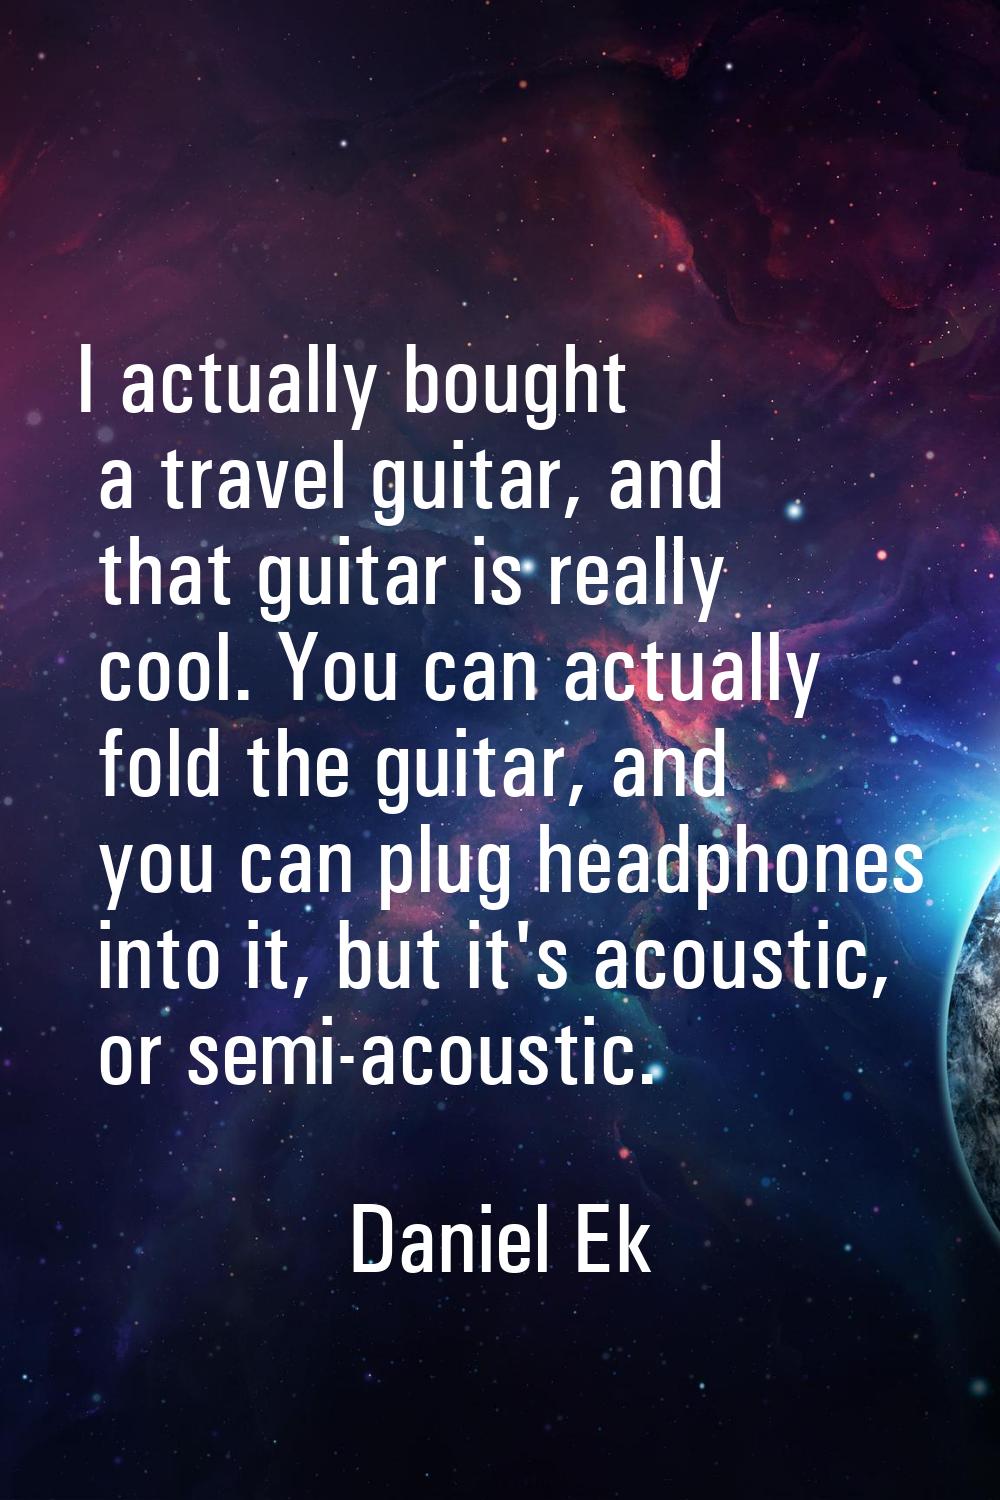 I actually bought a travel guitar, and that guitar is really cool. You can actually fold the guitar